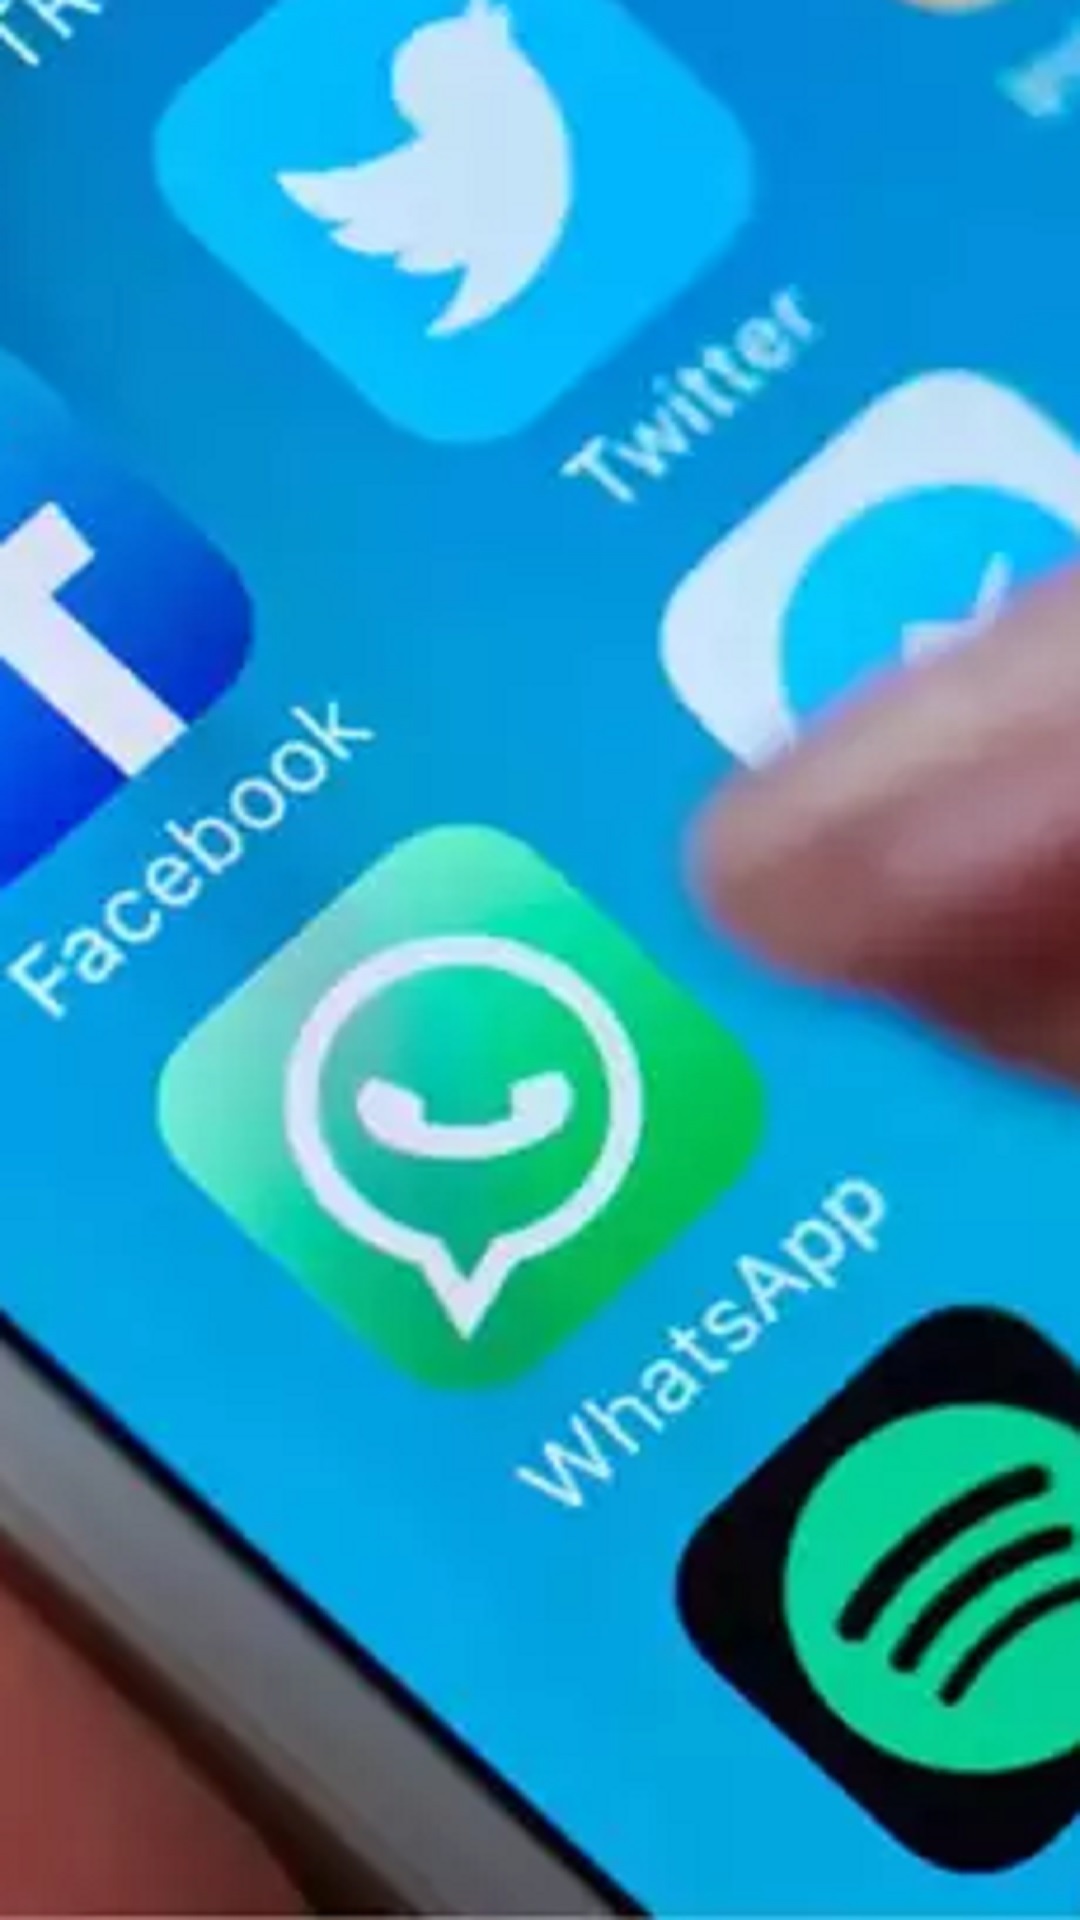 WhatsApp plans 'Meta Verified' subscription for verified business badges
